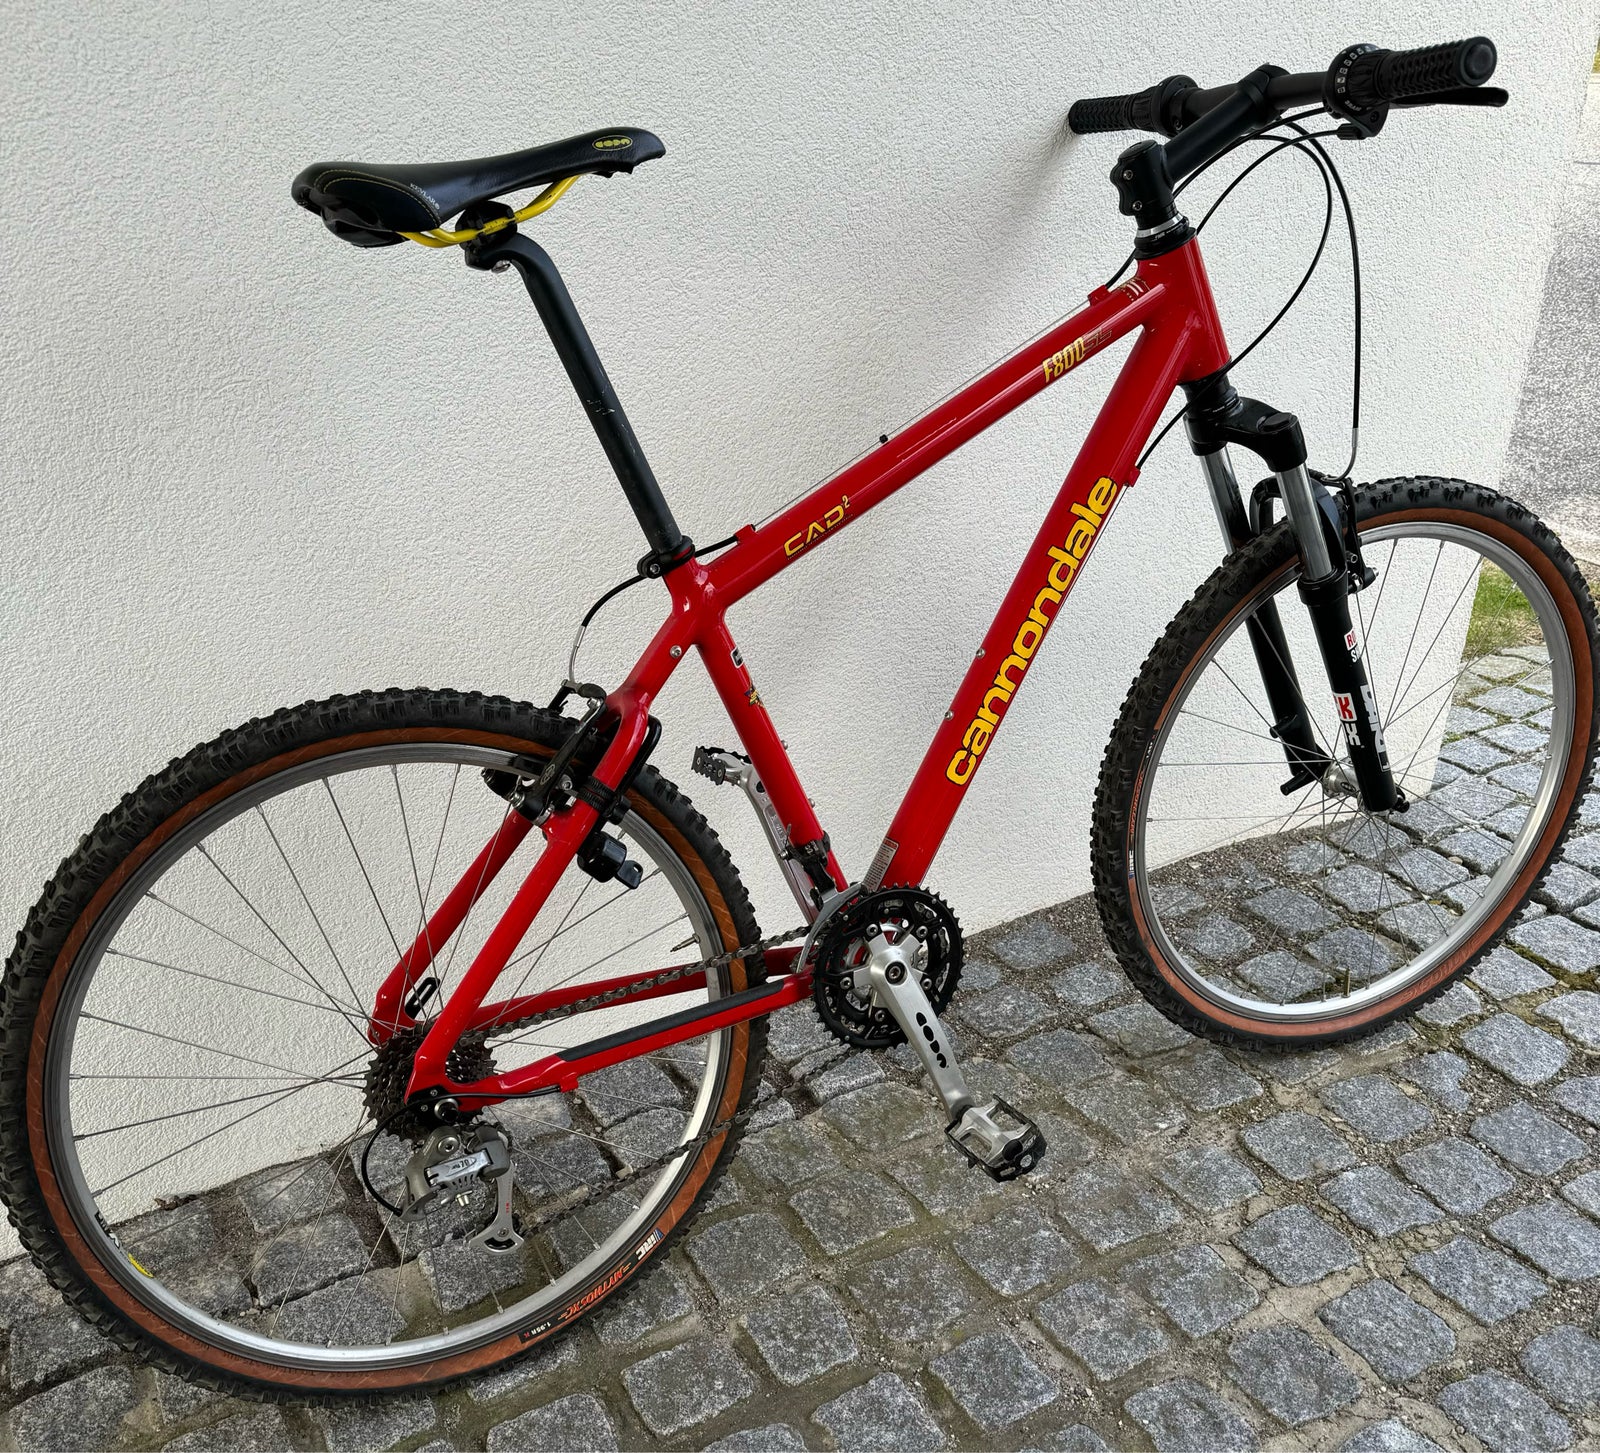 Cannondale F800 SL, anden mountainbike, 17-18 tommer